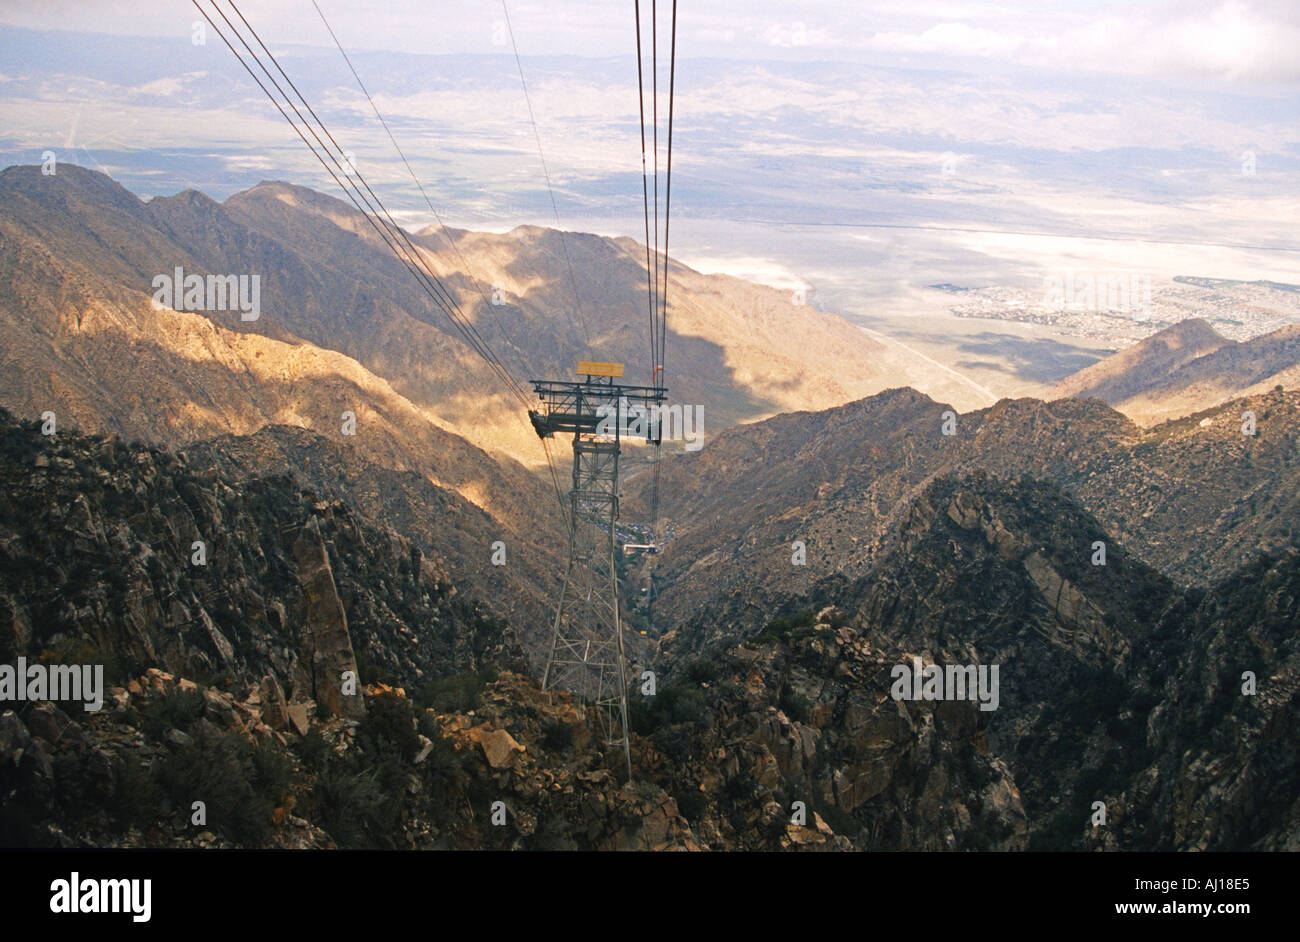 CALIFORNIA Palm Springs Aerial tramway support tower Mt San Jacinto State Park look over desert valley Stock Photo